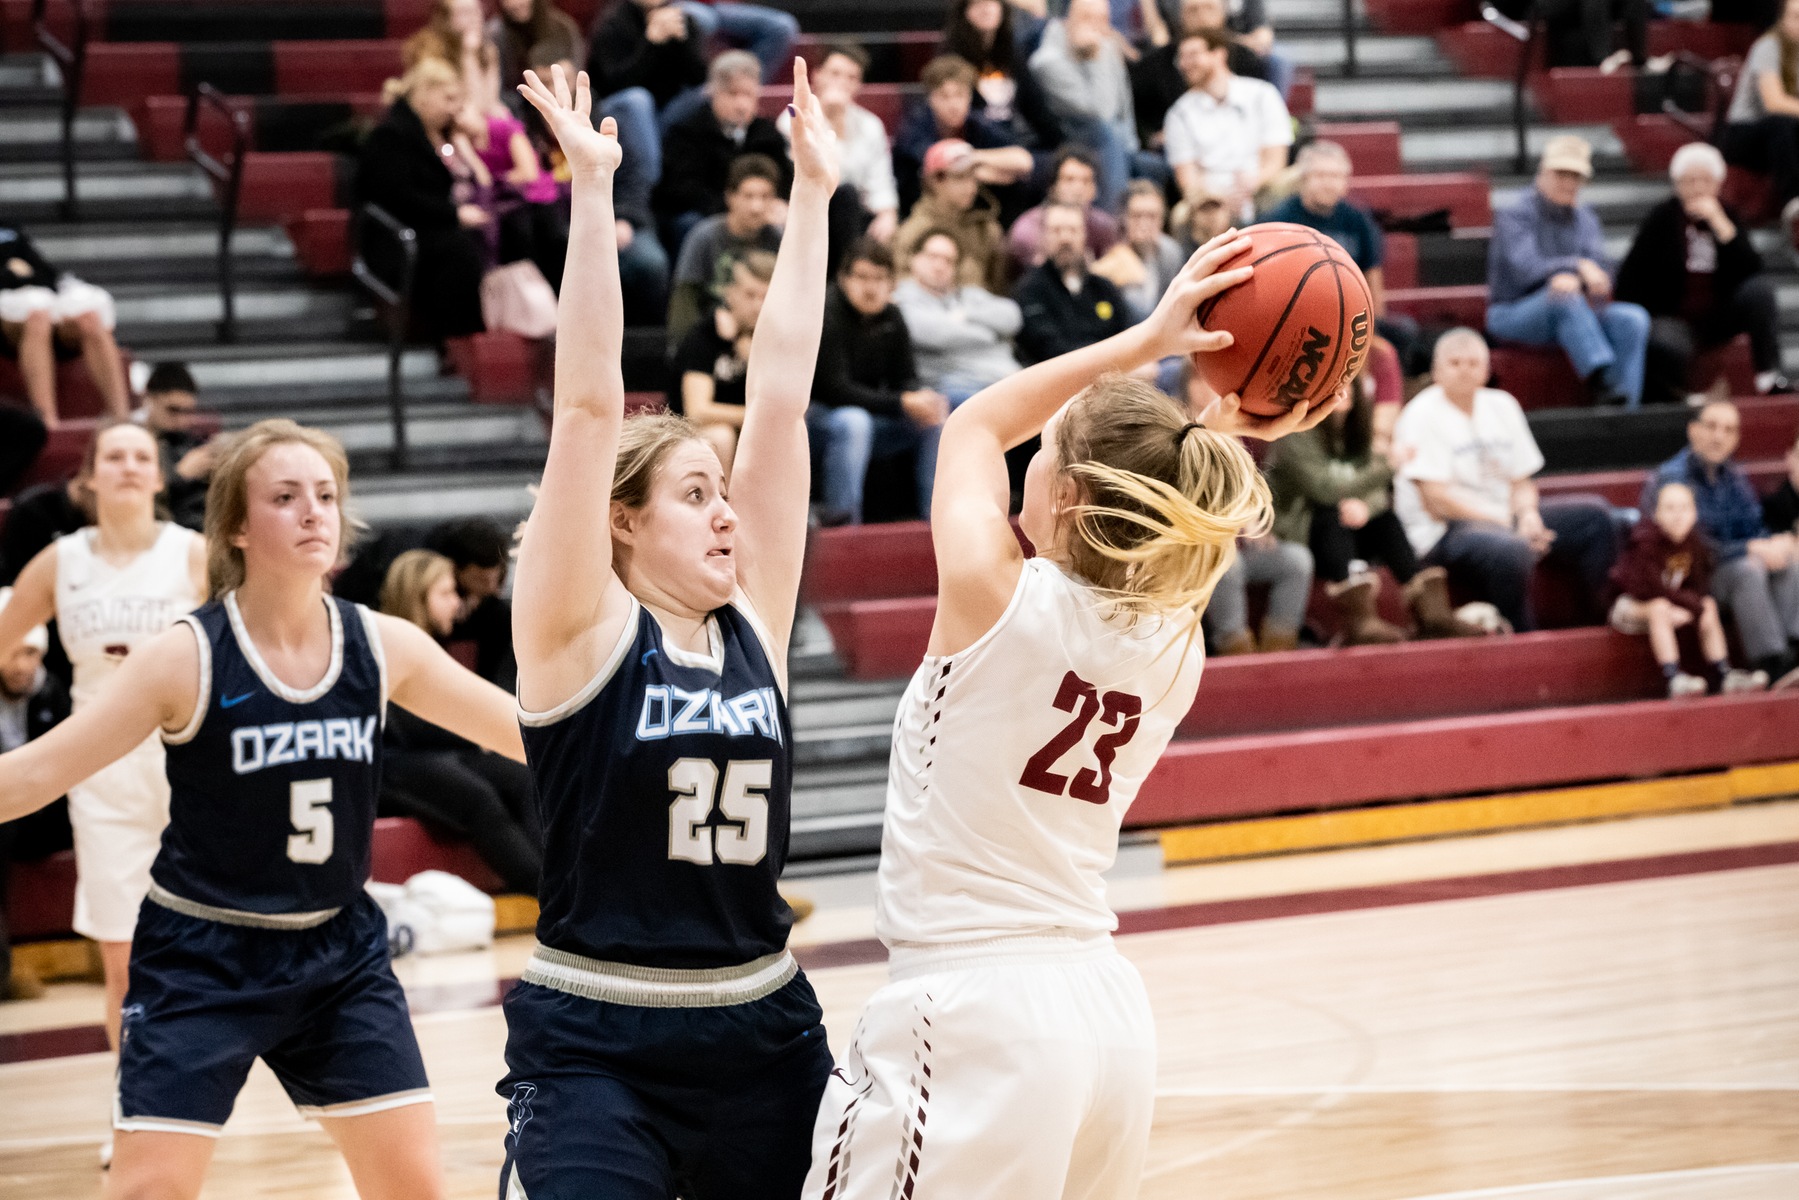 Women’s Basketball Season Ends at Conference Tourney